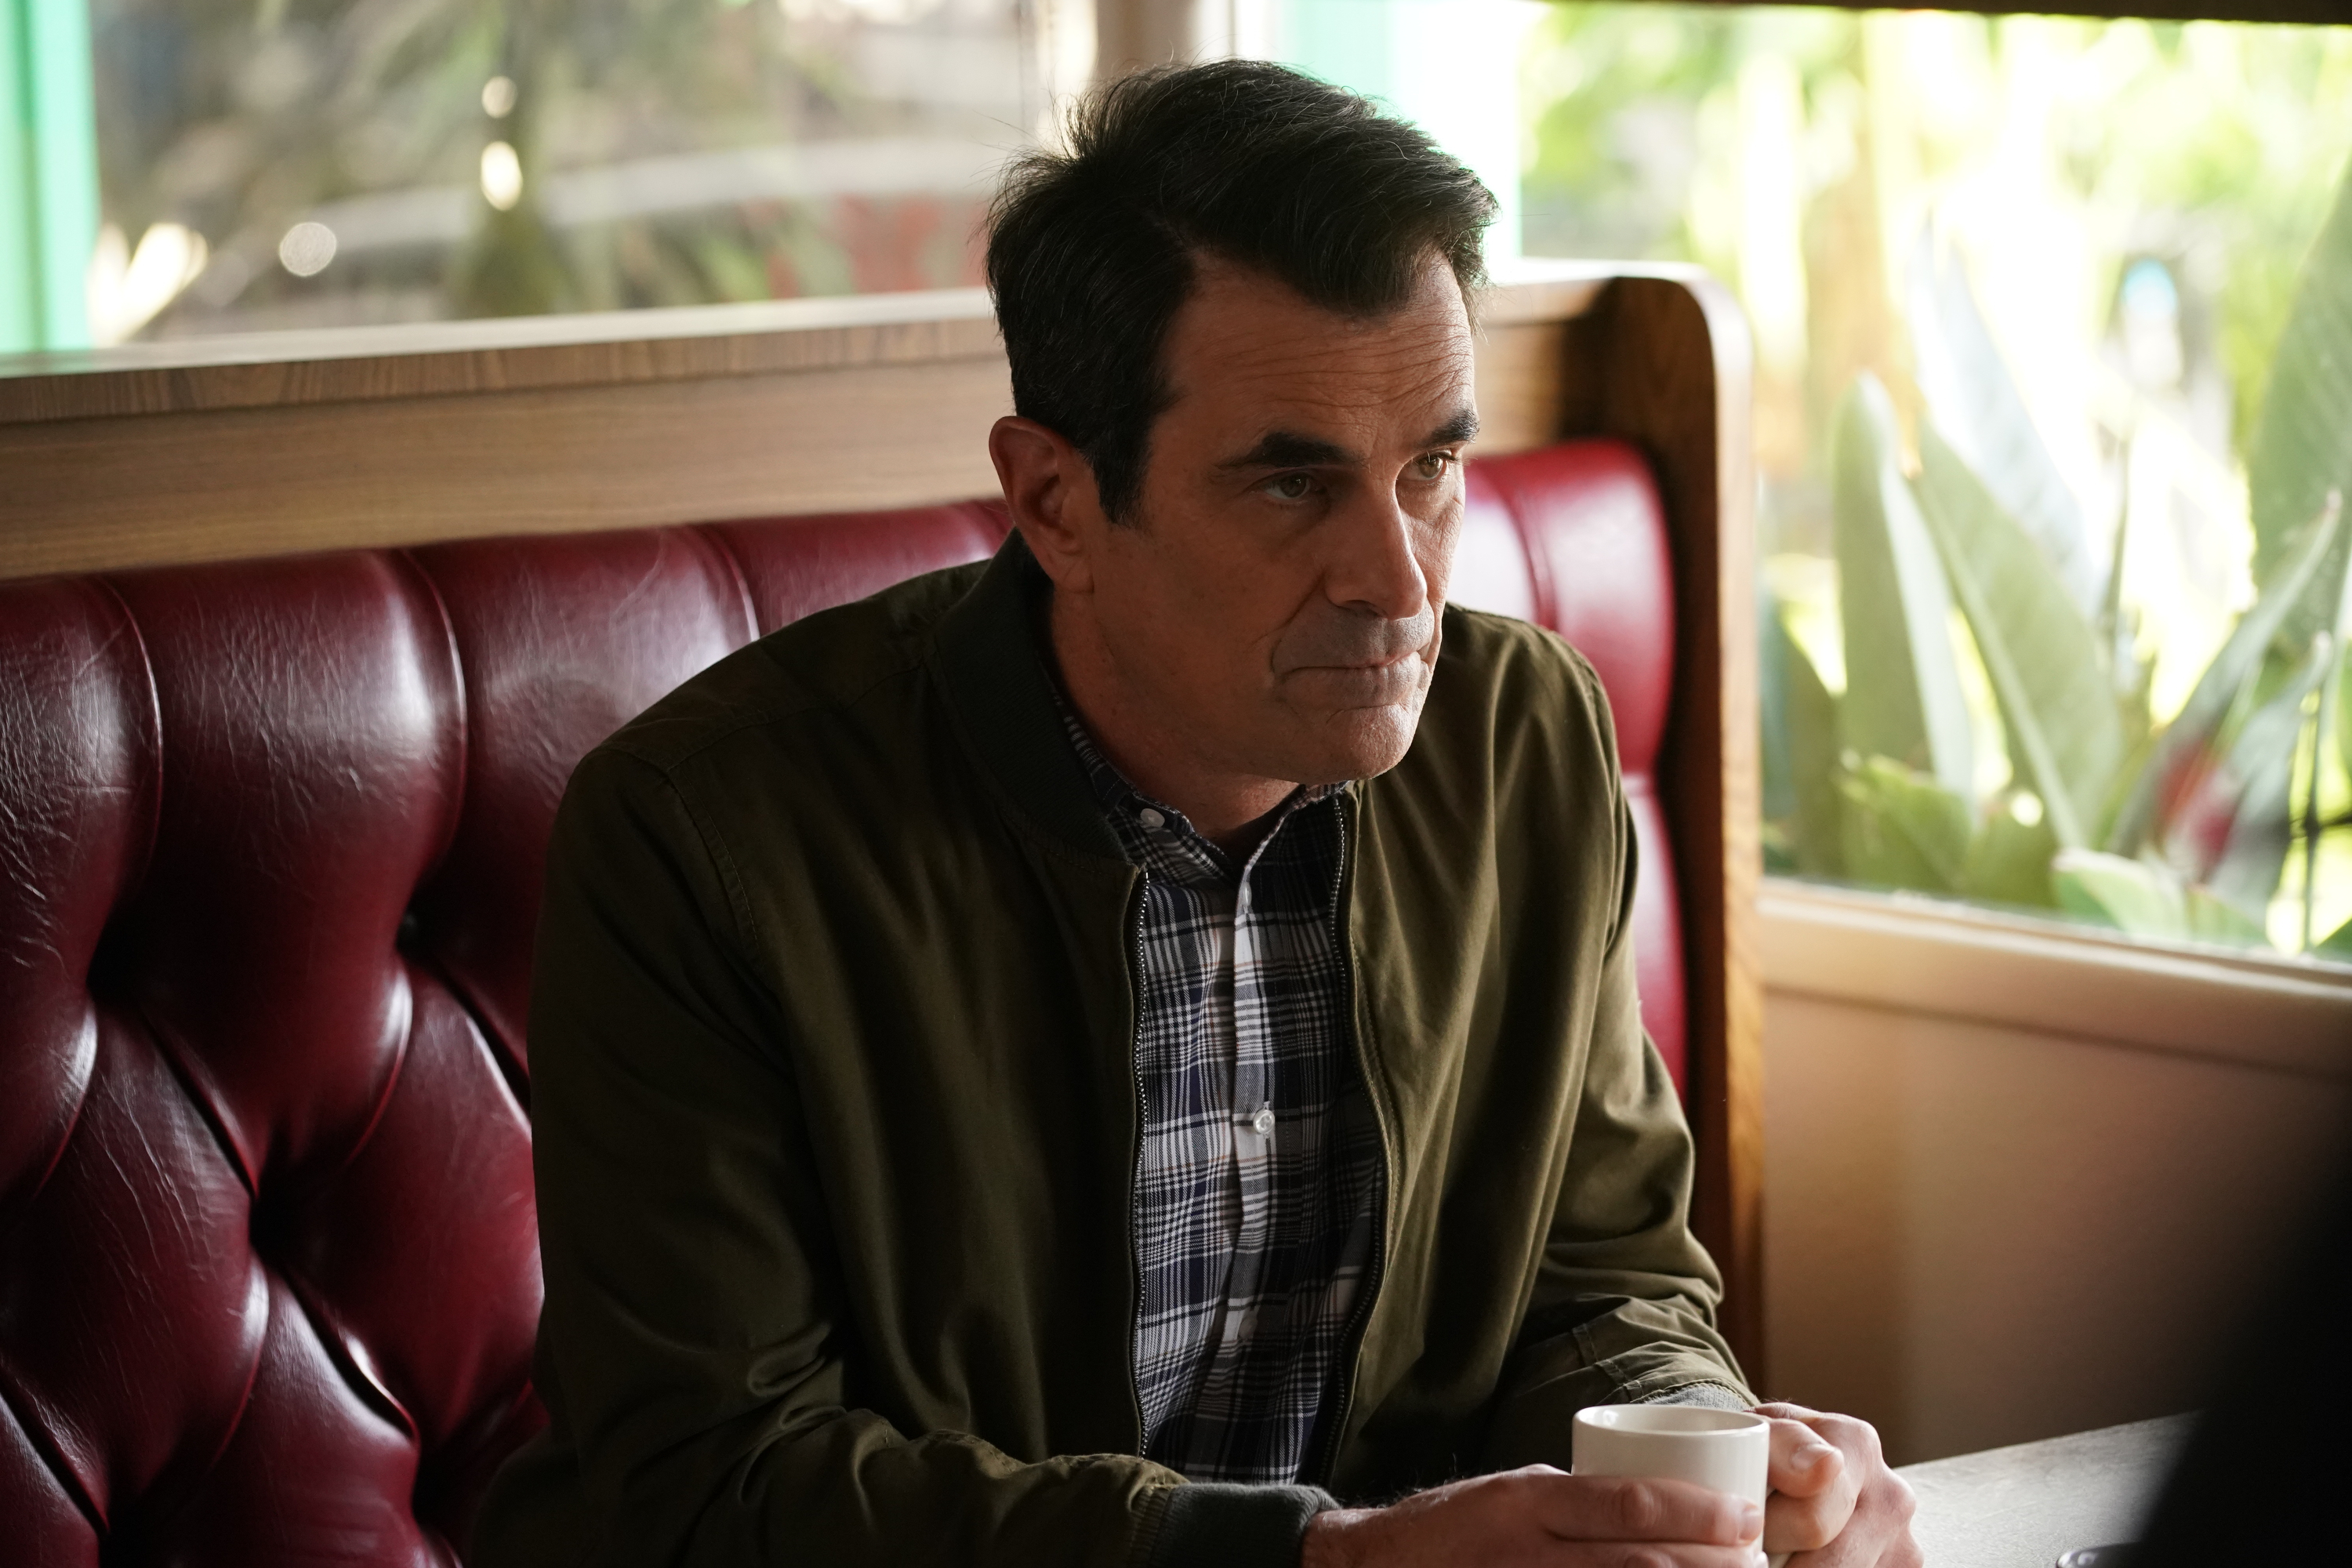 Ty Burrell playing the role of Phil Dunphy on ABC's "Modern Family" season 11 | Source: Getty Images